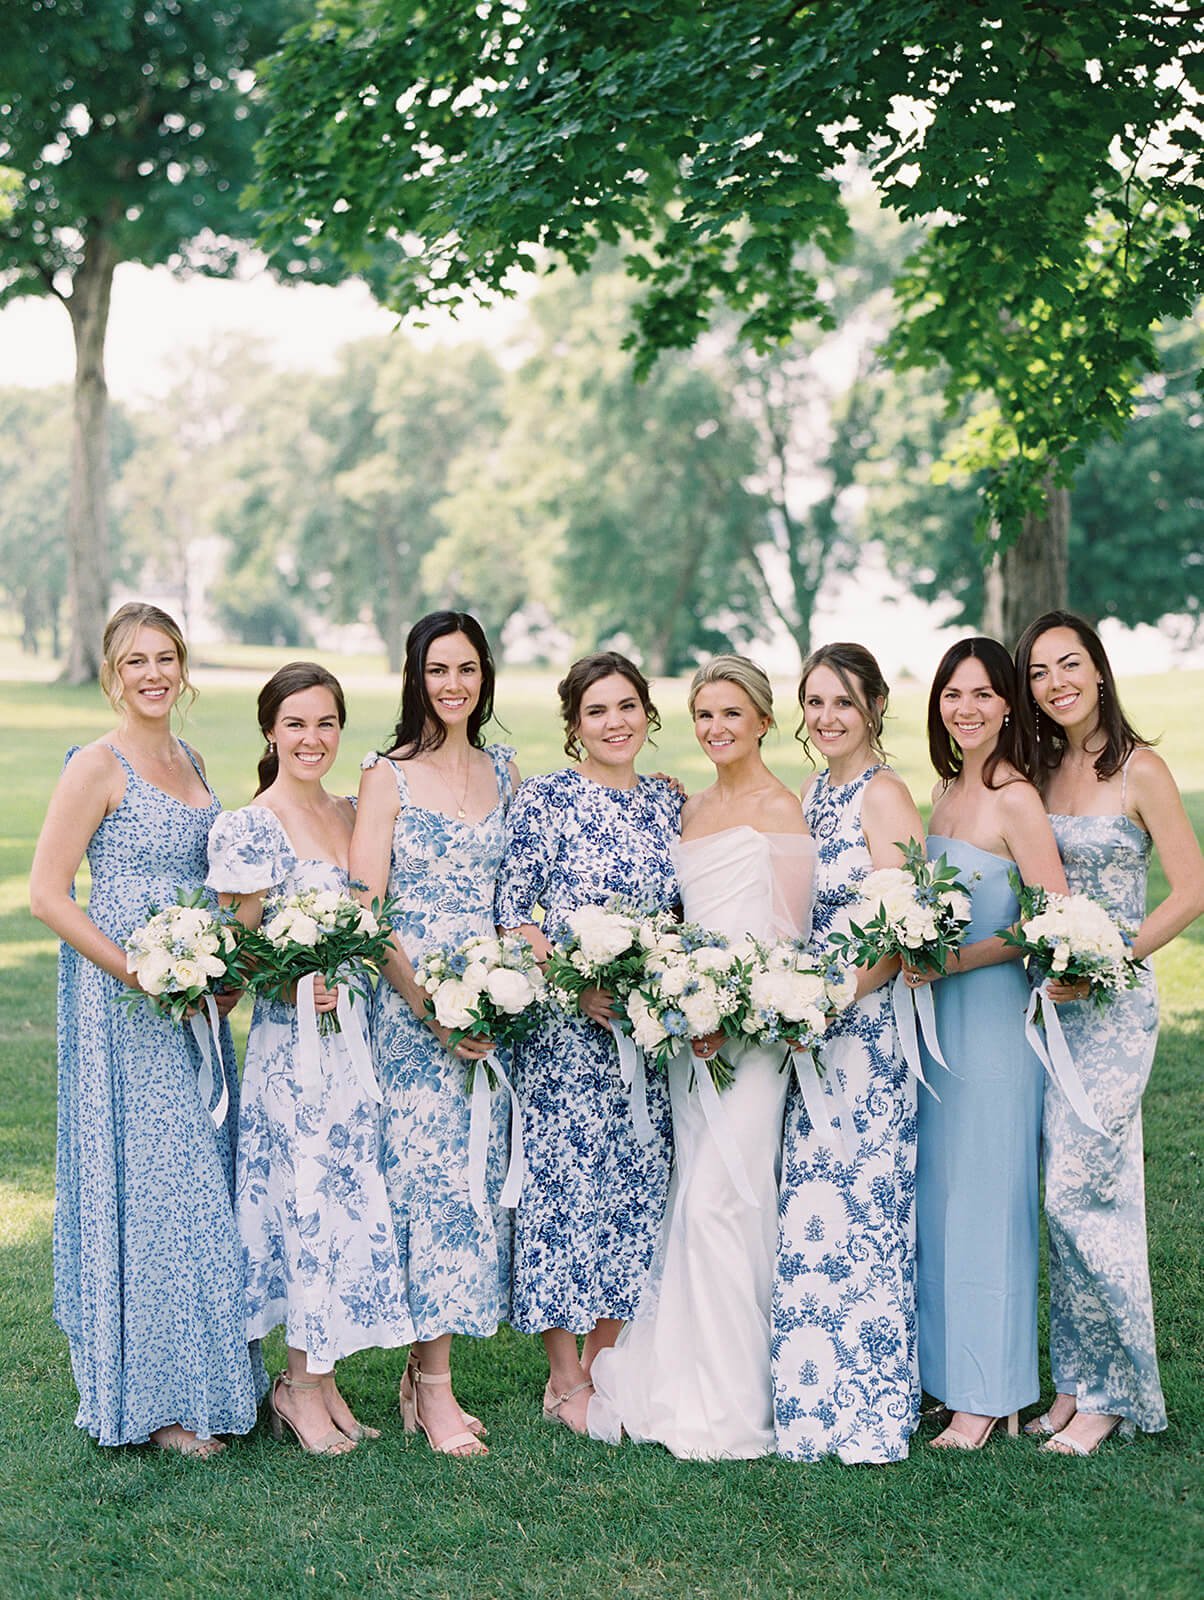 Mismatched bridesmaids in blue